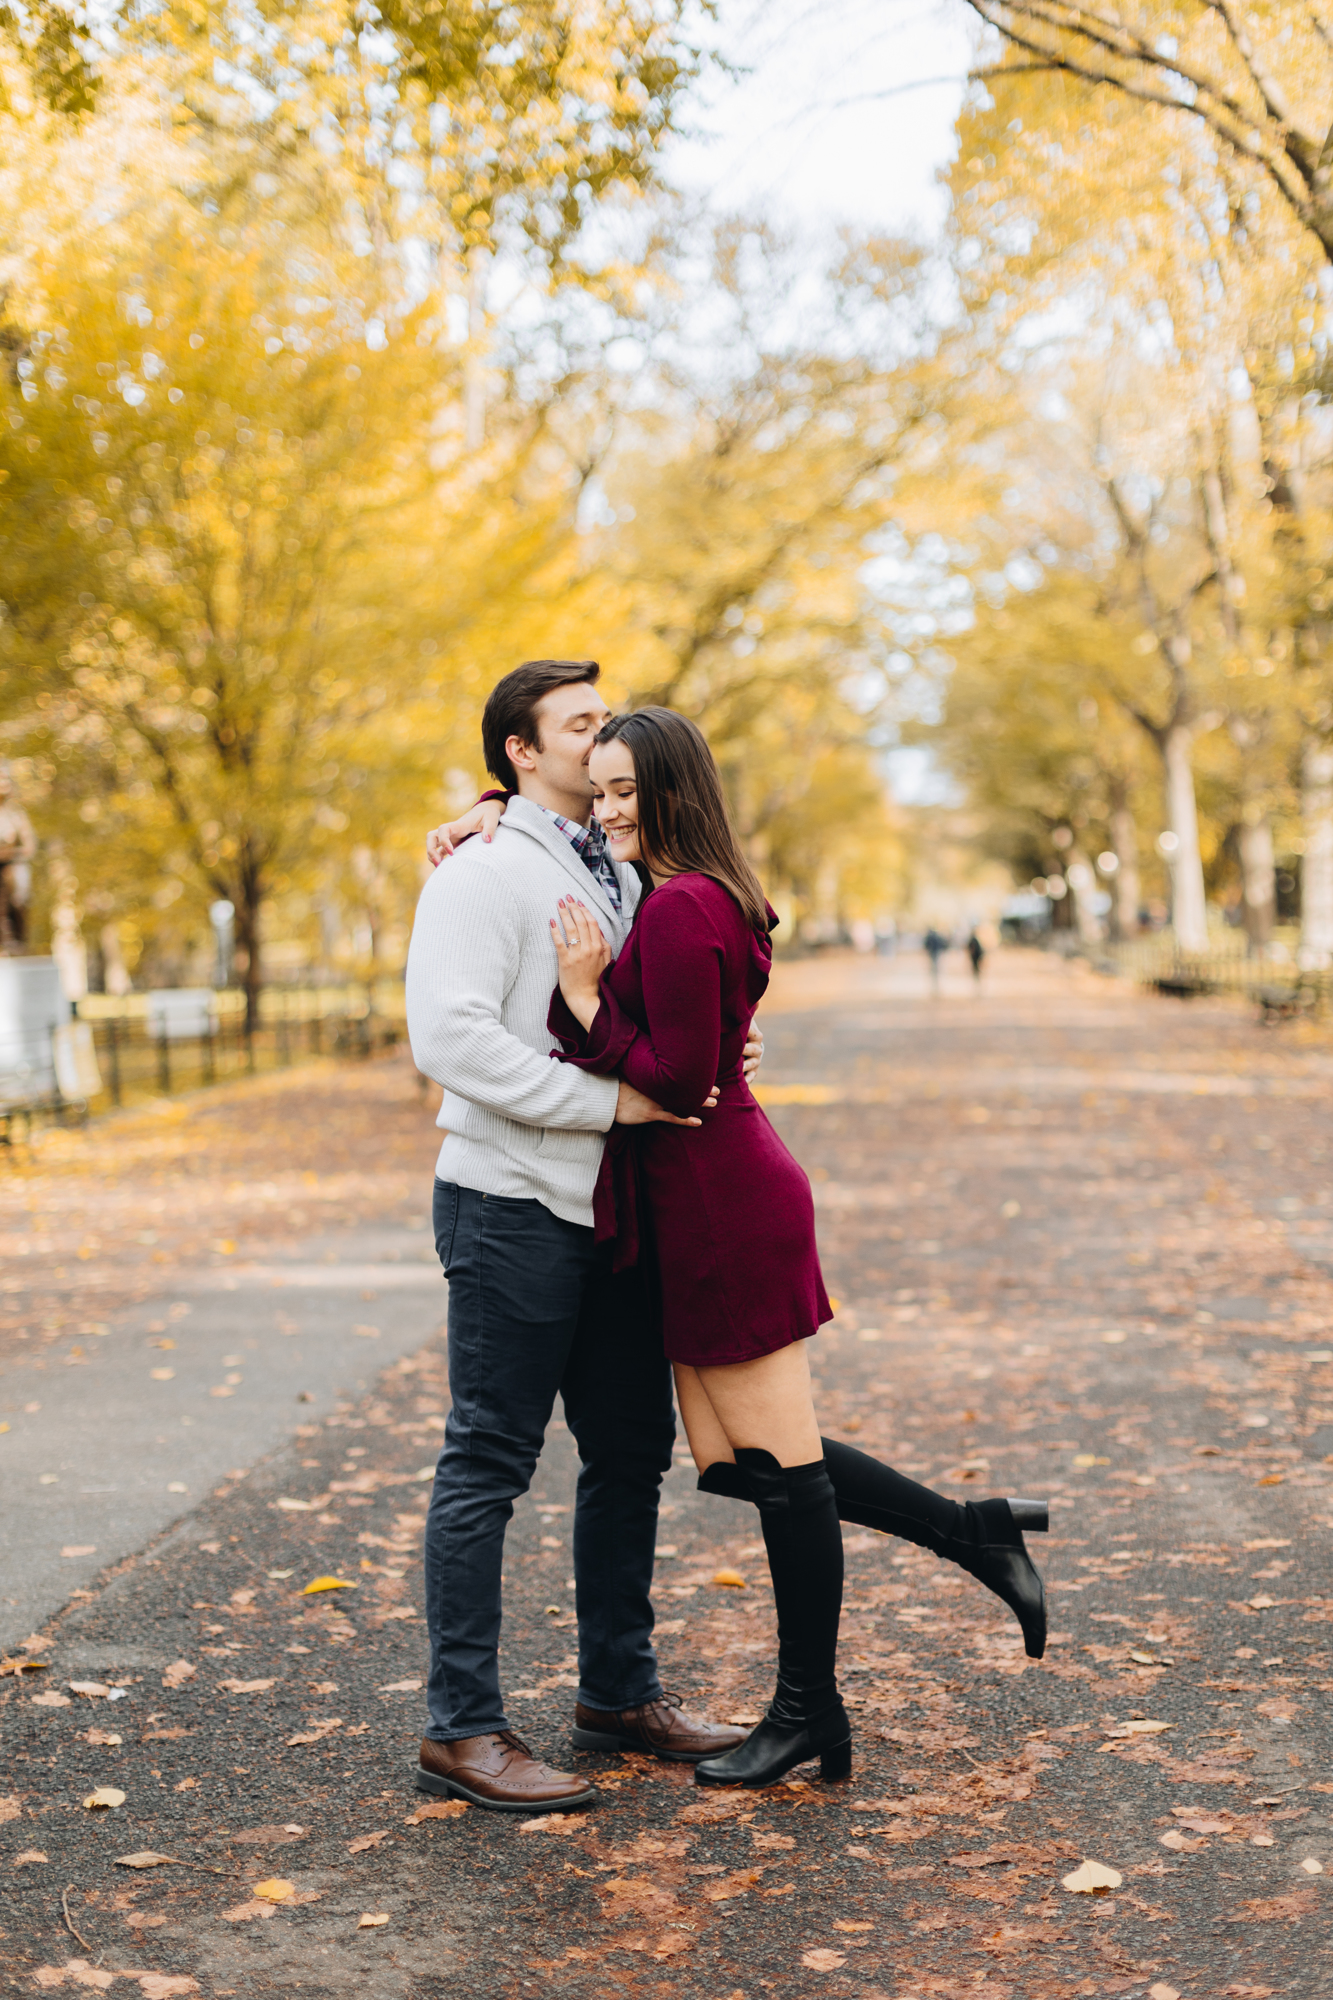 Lovely Pose Ideas for your Engagement Session